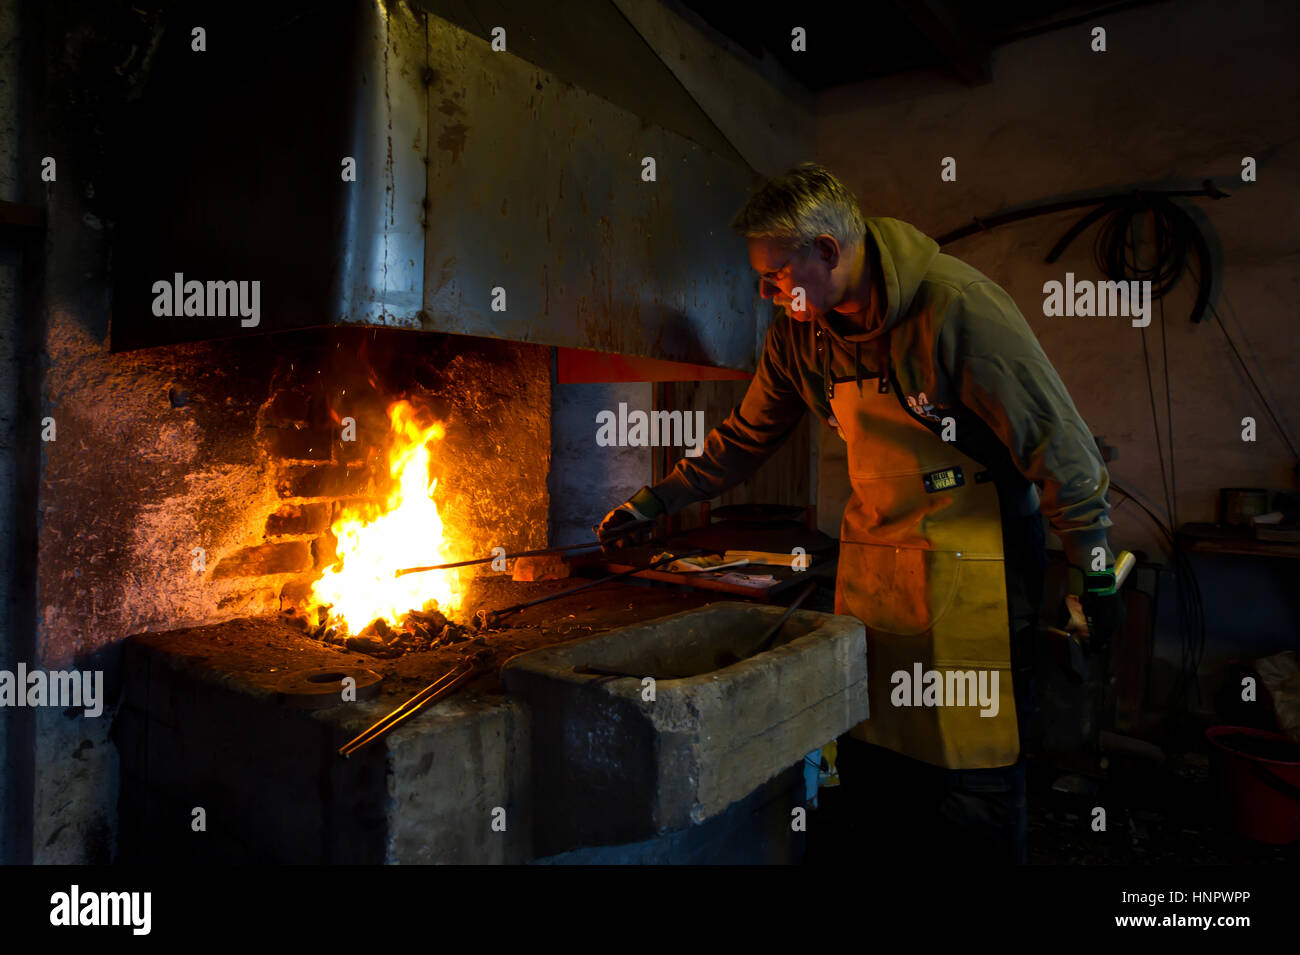 The Torresta Blacksmith heating the iron in the pit coal fire in Uppland, Sweden Stock Photo